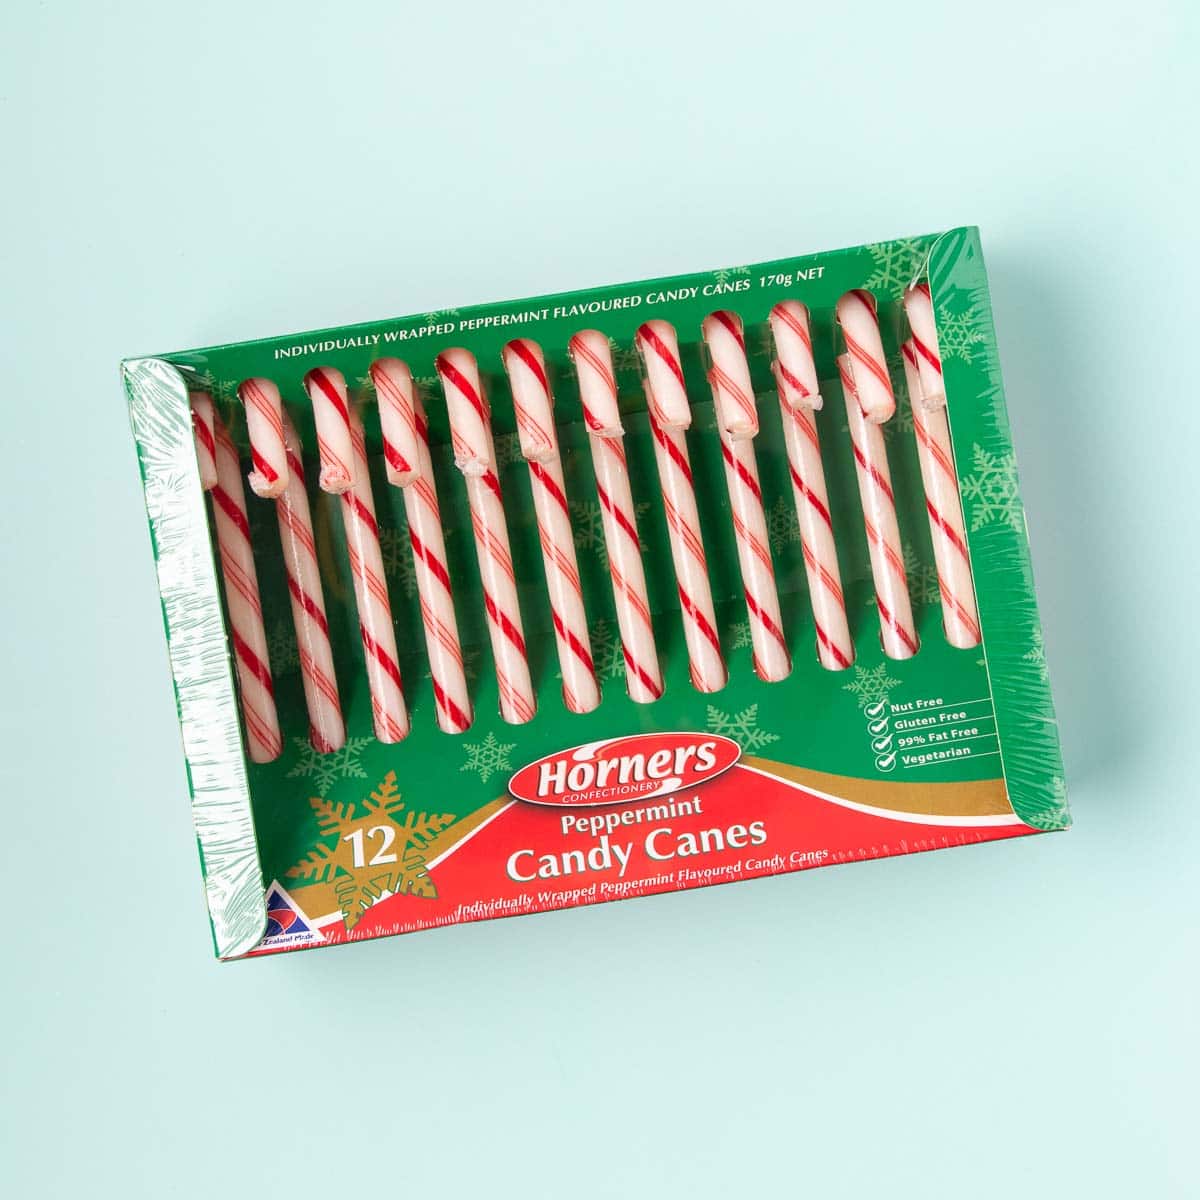 A box of 12 Horners candy canes, on a mint green background.